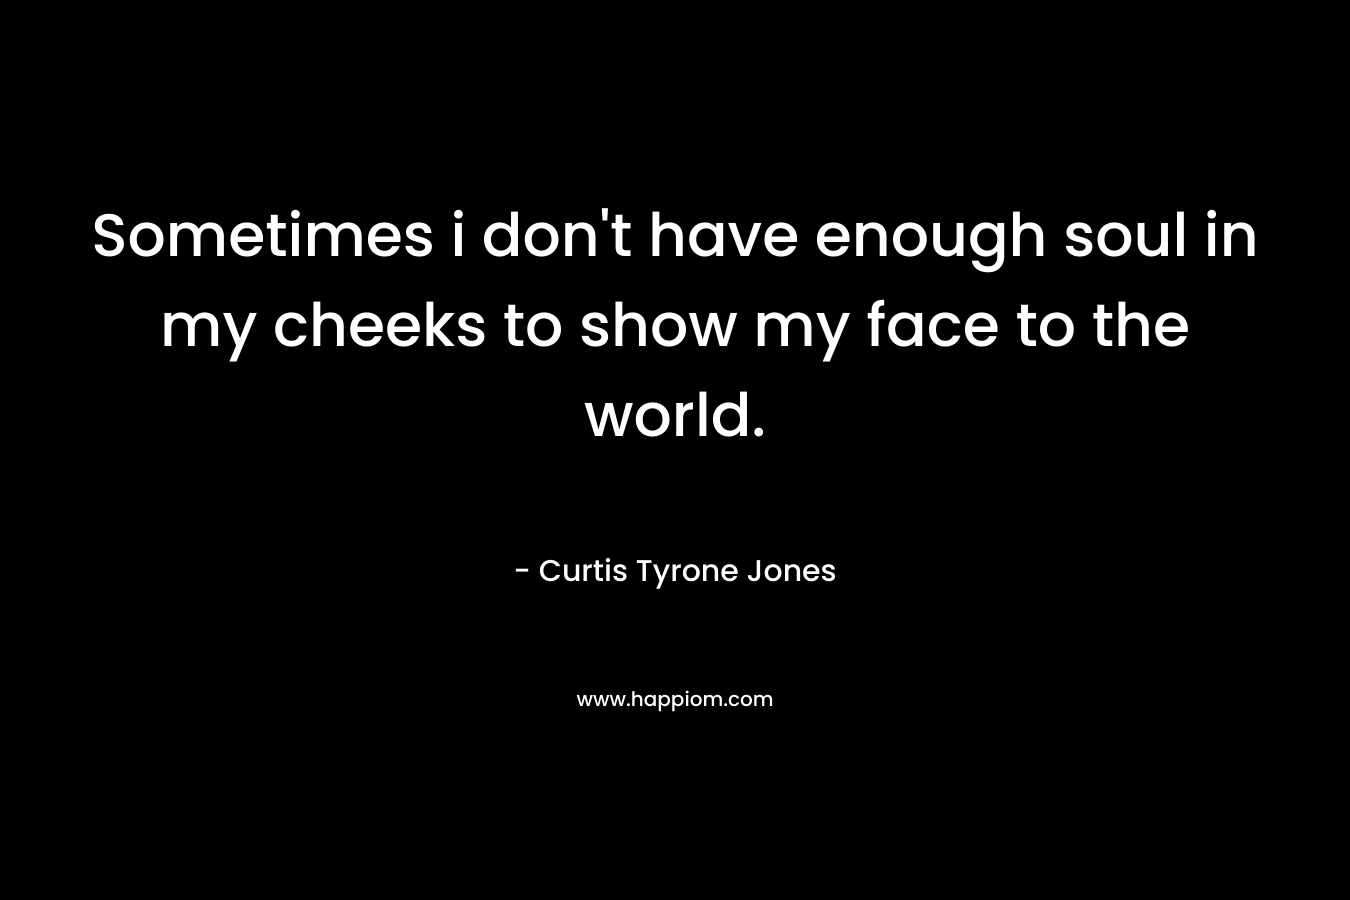 Sometimes i don't have enough soul in my cheeks to show my face to the world.